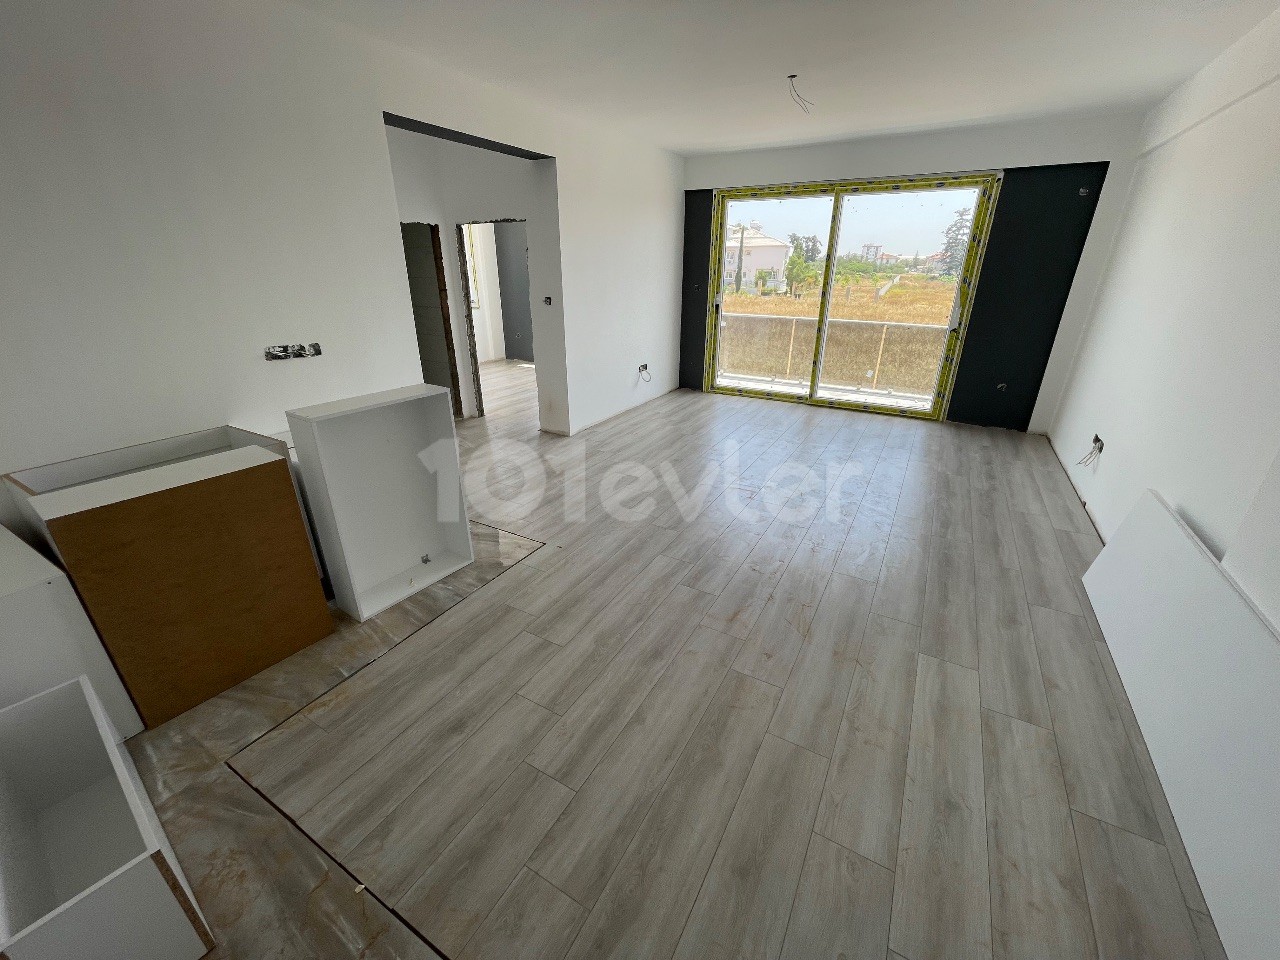 Spacious 3 bedroom flat for sale in Famagusta / Çanakkale region, ready for delivery.